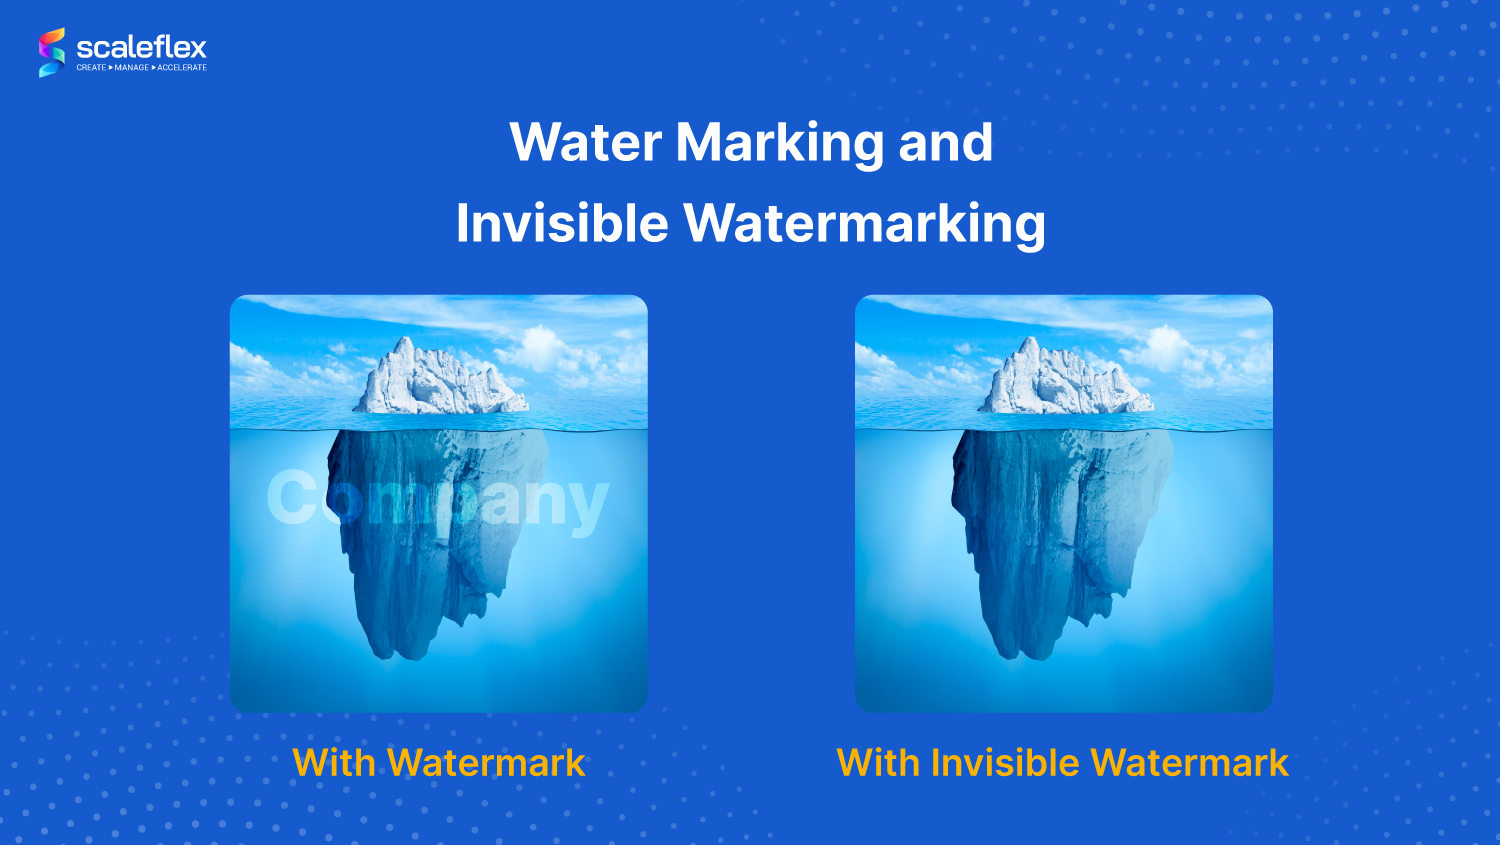 How invisible watermarking looks like